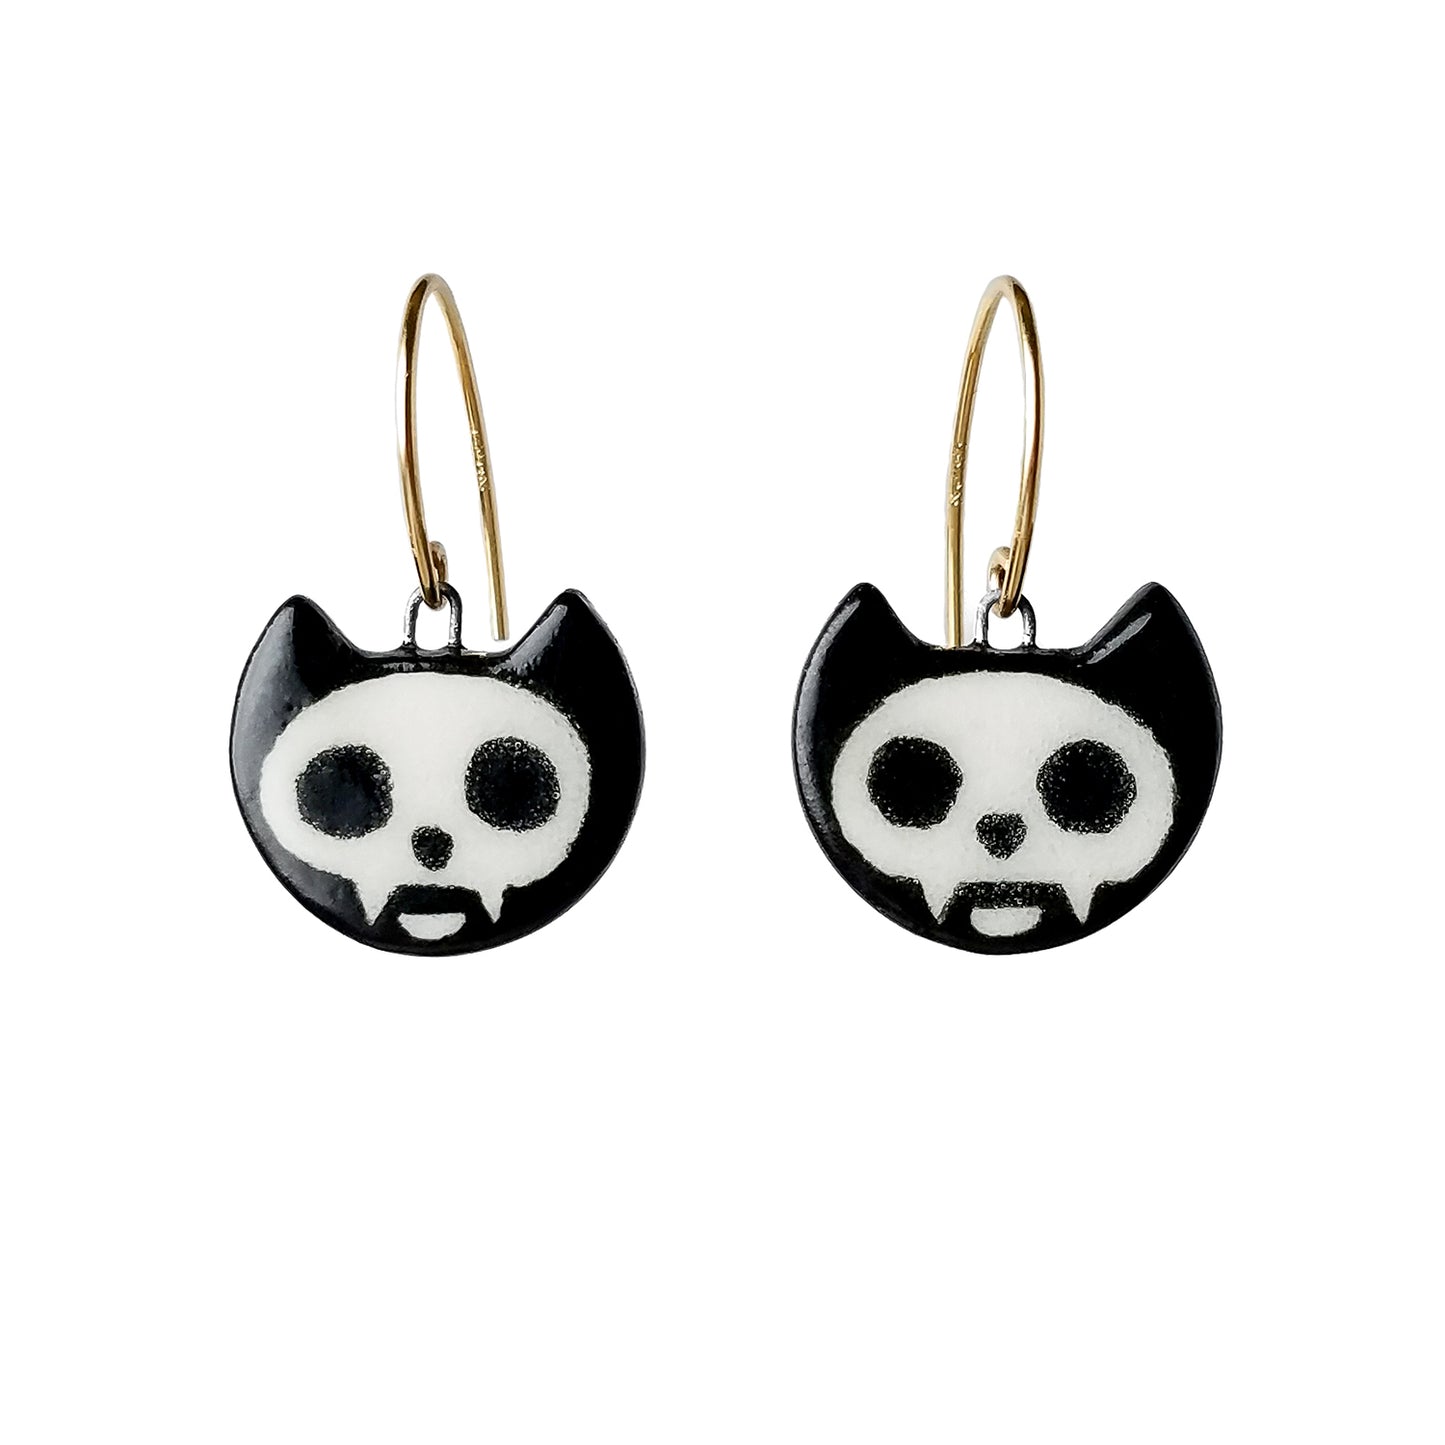 Porcelain cat heads painted as Skelecat cat skulls on gold-filled curved ear wires.  Earrings are on a white background.